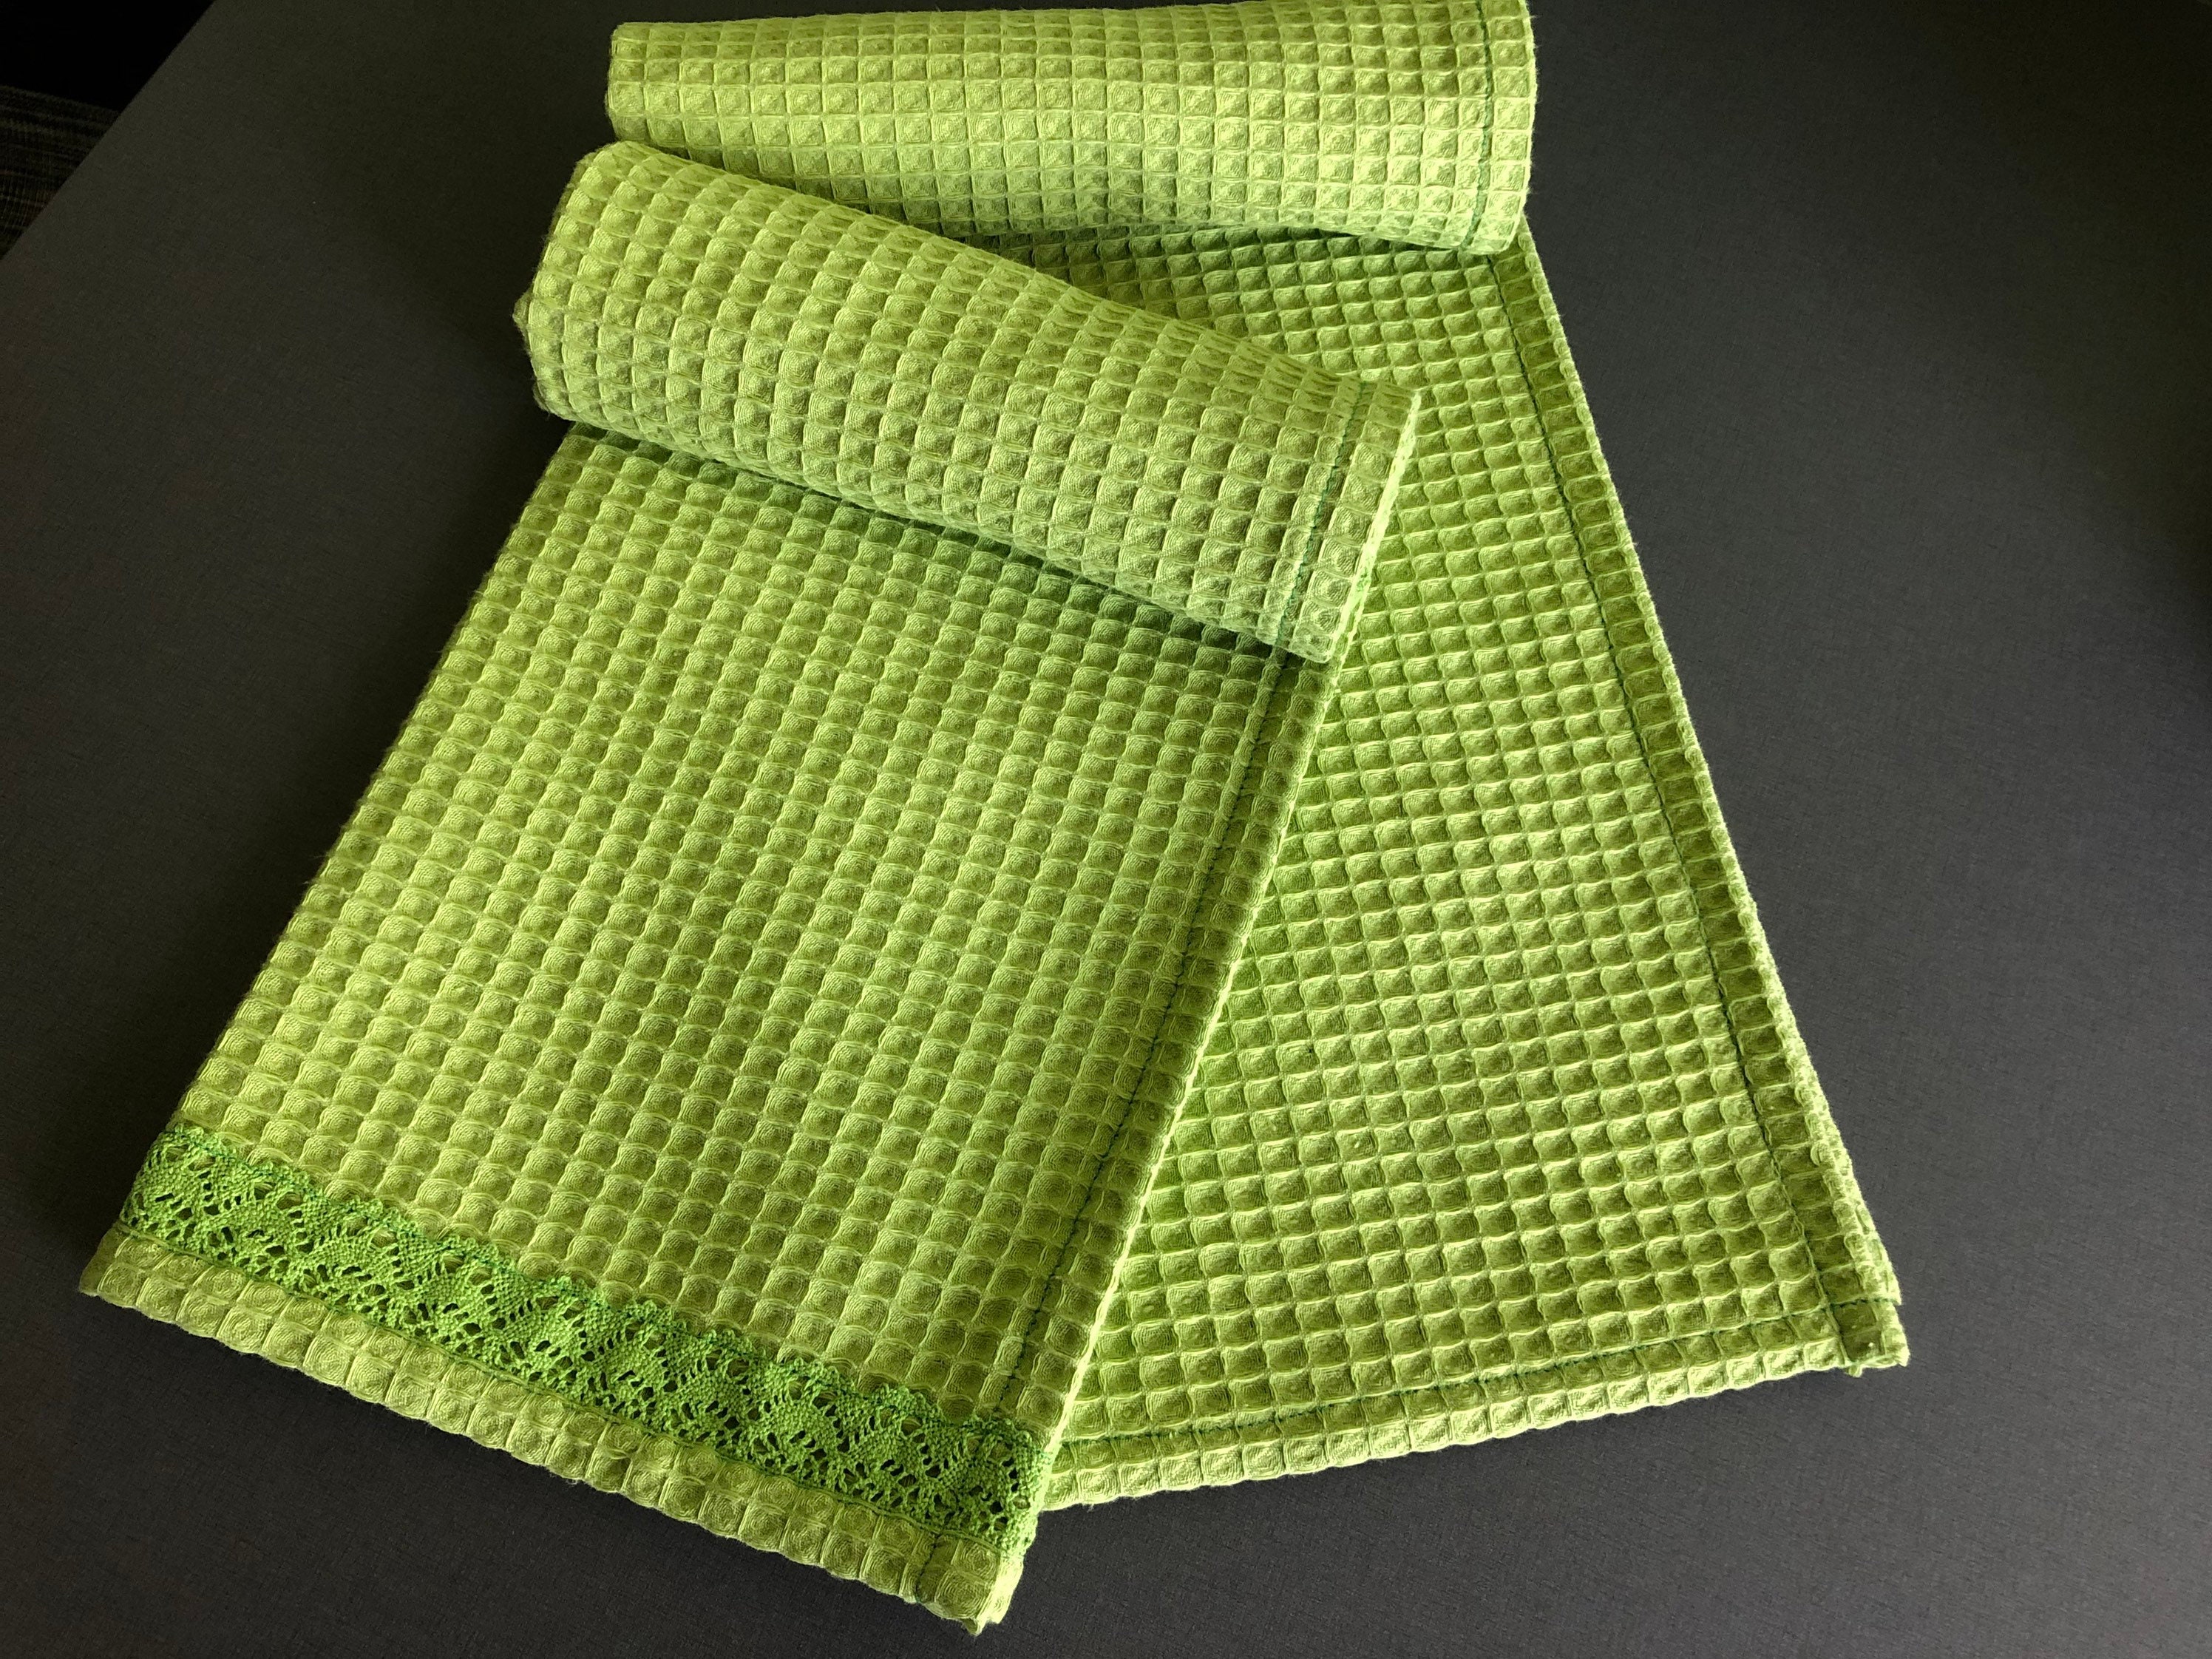 Kewadony Sage Green Grey Kitchen Towels 4 Pack Dish Towels for Kitchen,  Sage Green Abstract Modern Painting Absorbent Microfiber Hand Towels for